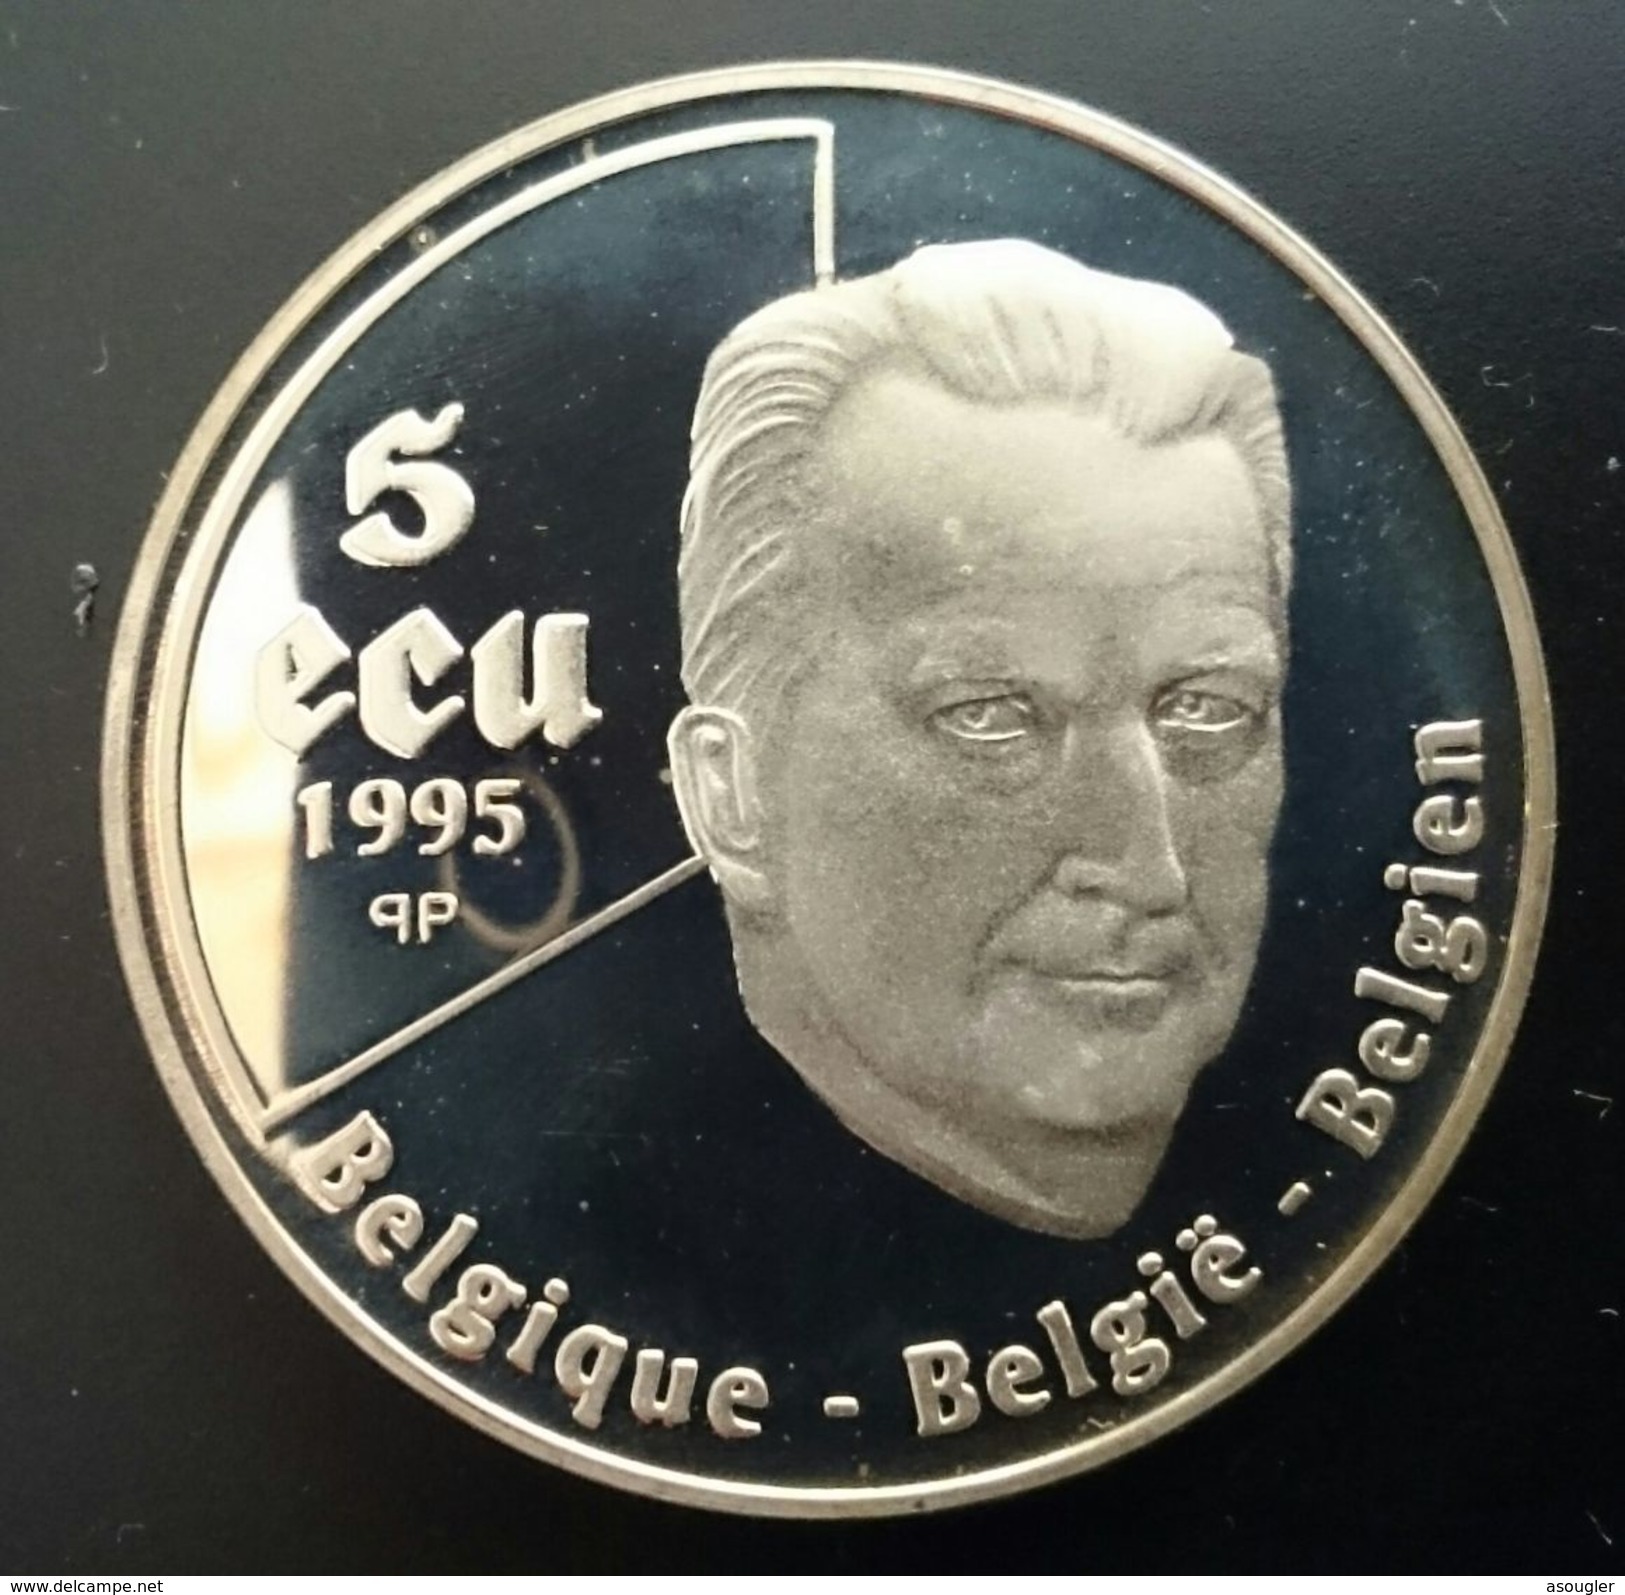 BELGIUM 5 ECU (EURO) 1995 SILVER PROOF "50th Anniversary - United Nations 1945-1995" Free Shipping Via Registered Air - Ecus (gold)